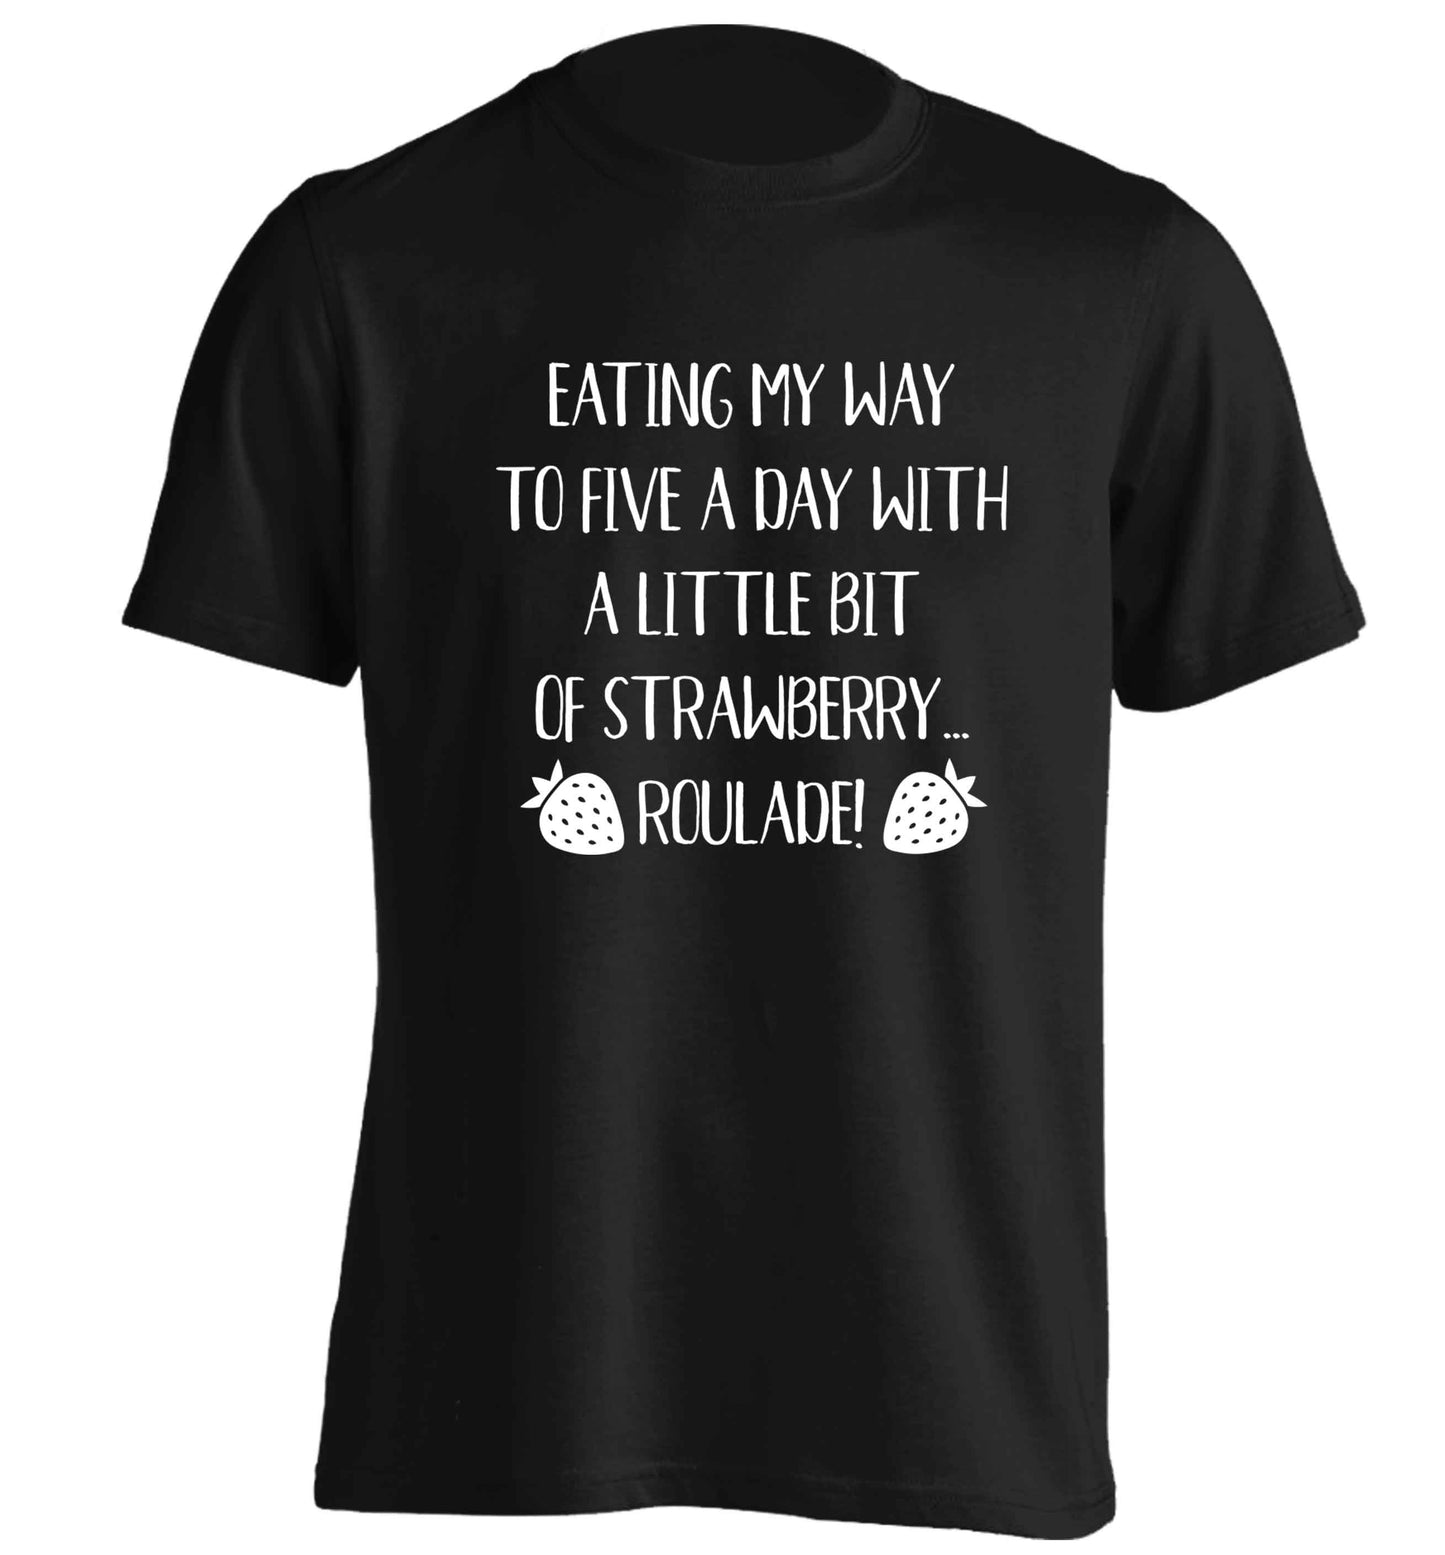 Eating my way to five a day with a little bit of strawberry roulade adults unisex black Tshirt 2XL